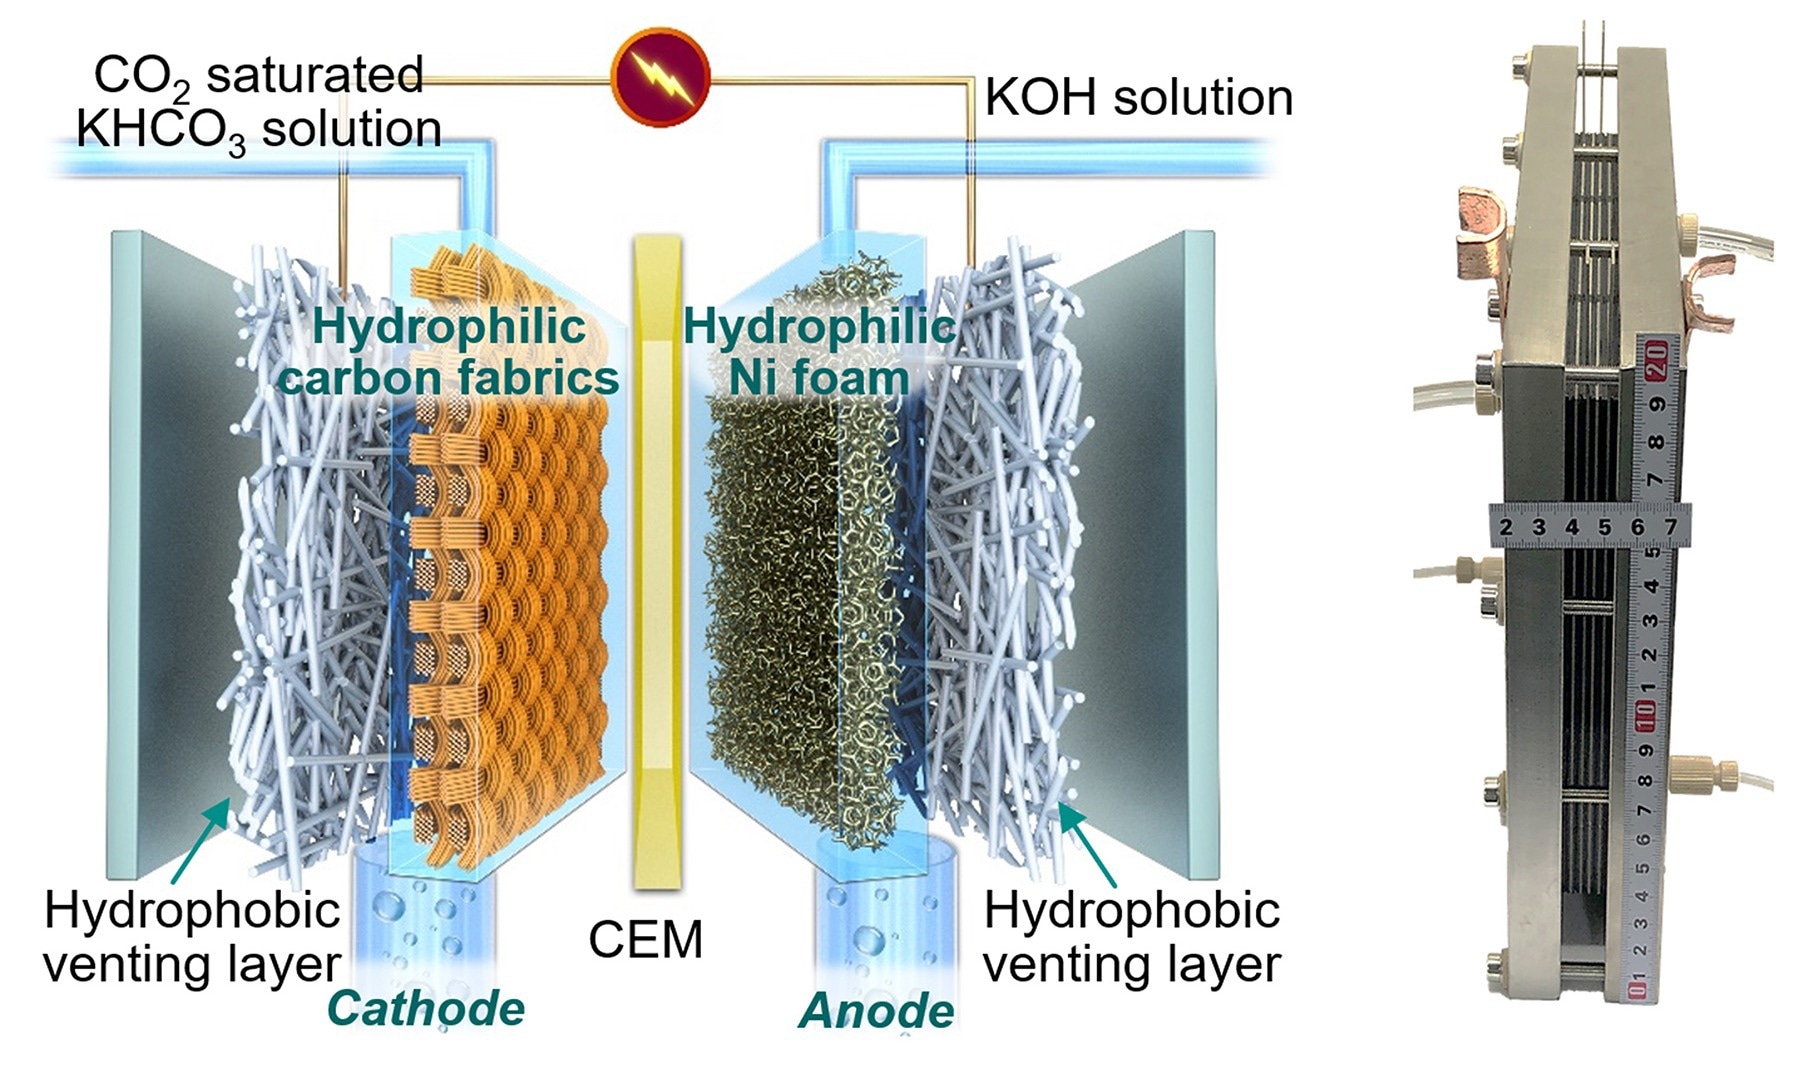 New CO2 Conversion Technology Helps Fight Against Climate Change - AZoCleantech